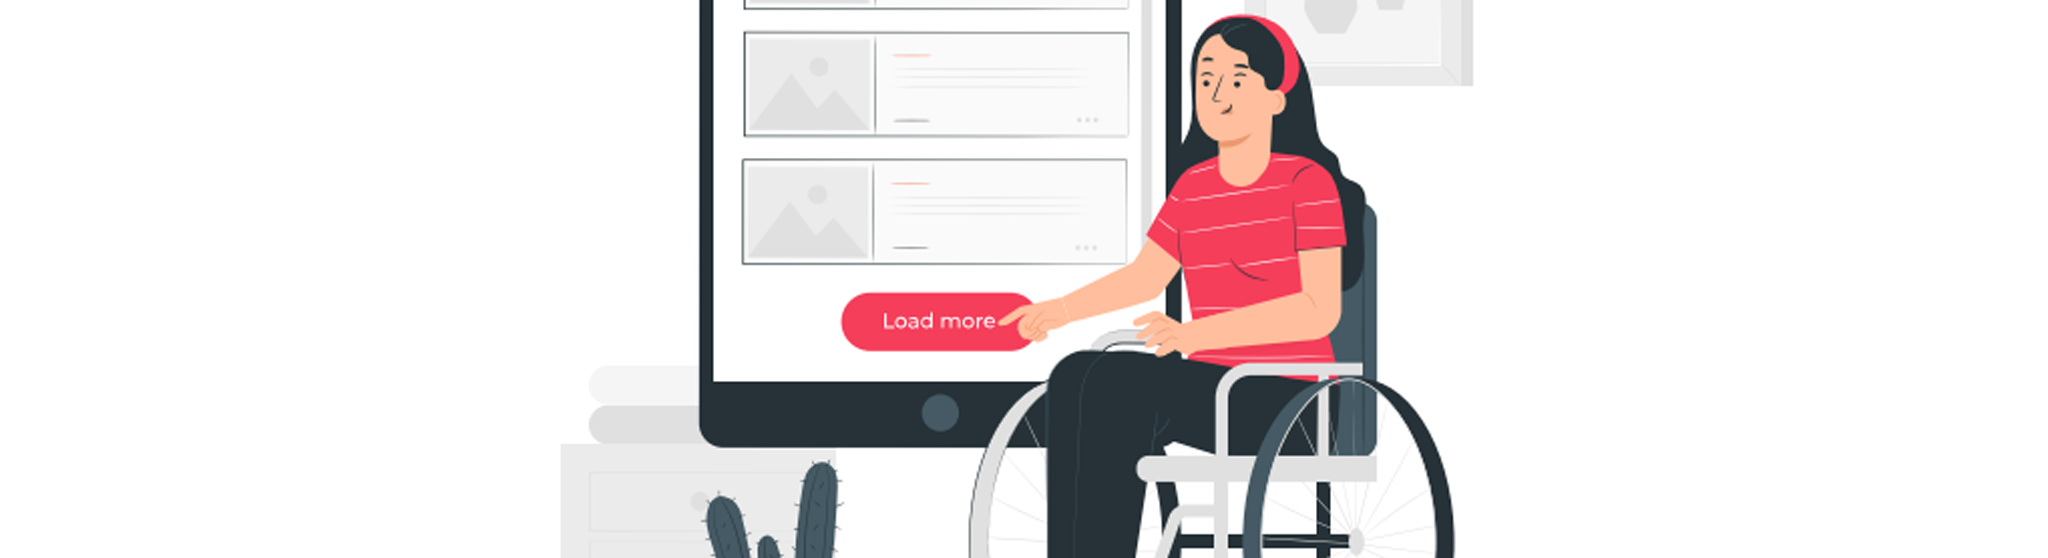 Accessibility Testing – Why Should Organizations Mandate It Before Their Product Goes Live 